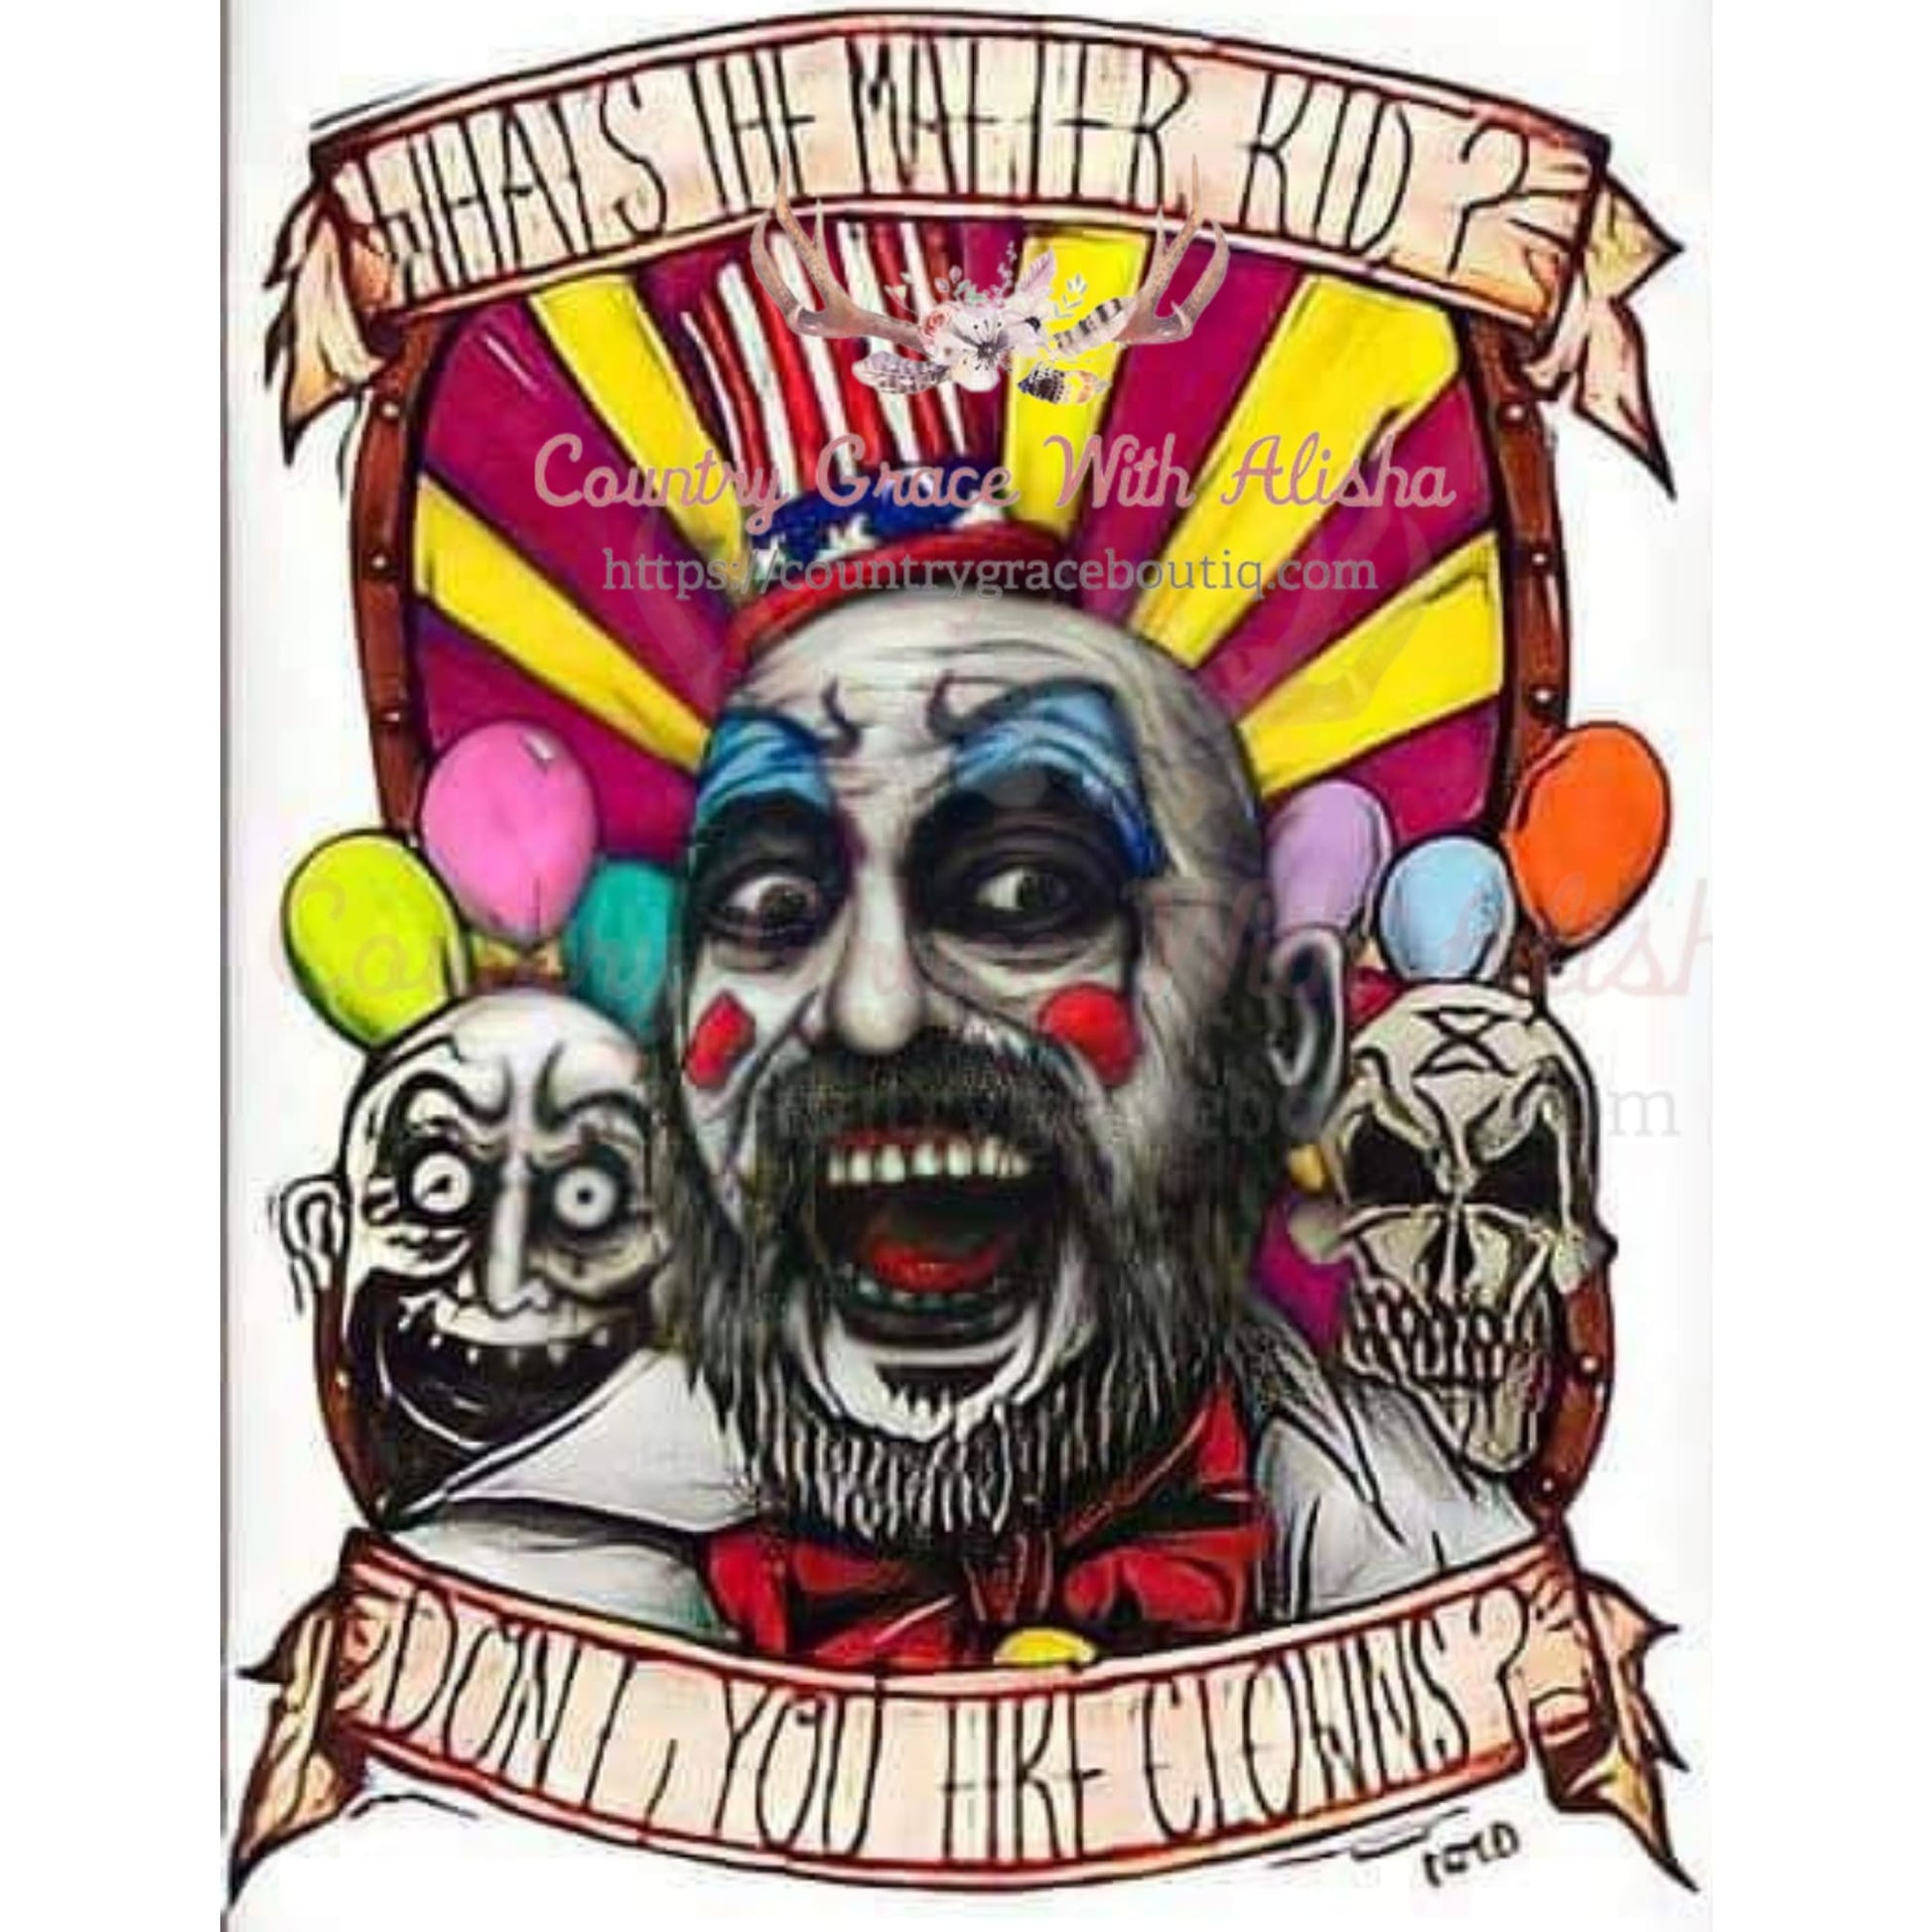 Scary Clown Sublimation Transfer - Sub $1.50 Country Grace 